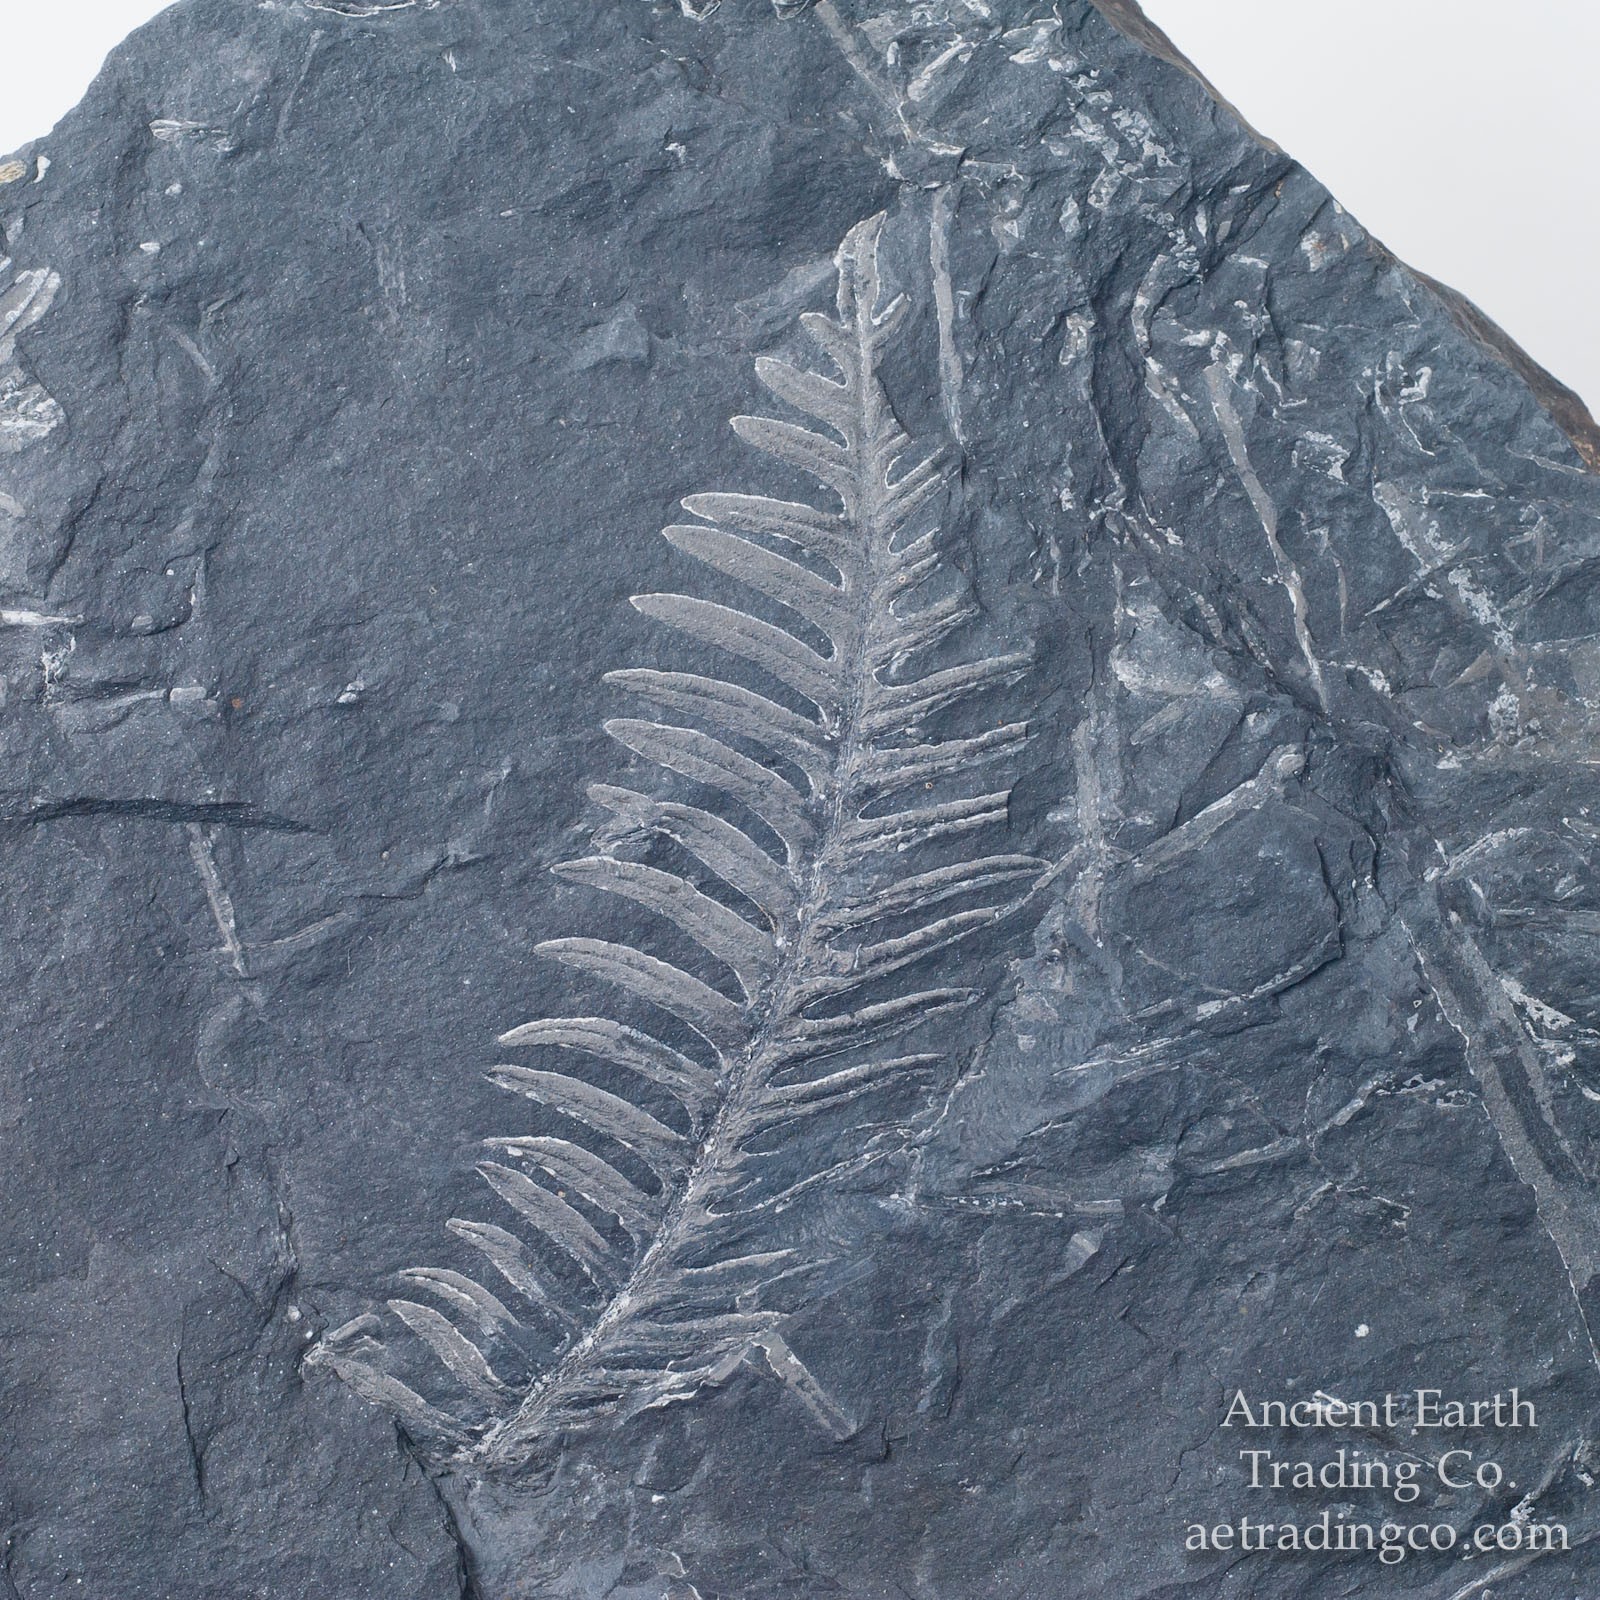 https://ancientearthtradingco.com/fossils/plants/st-clair-pennsylvania/seed-fern-branch-tips-multiple-leaf-fossils-from-pennsylvania-usa.html image source here